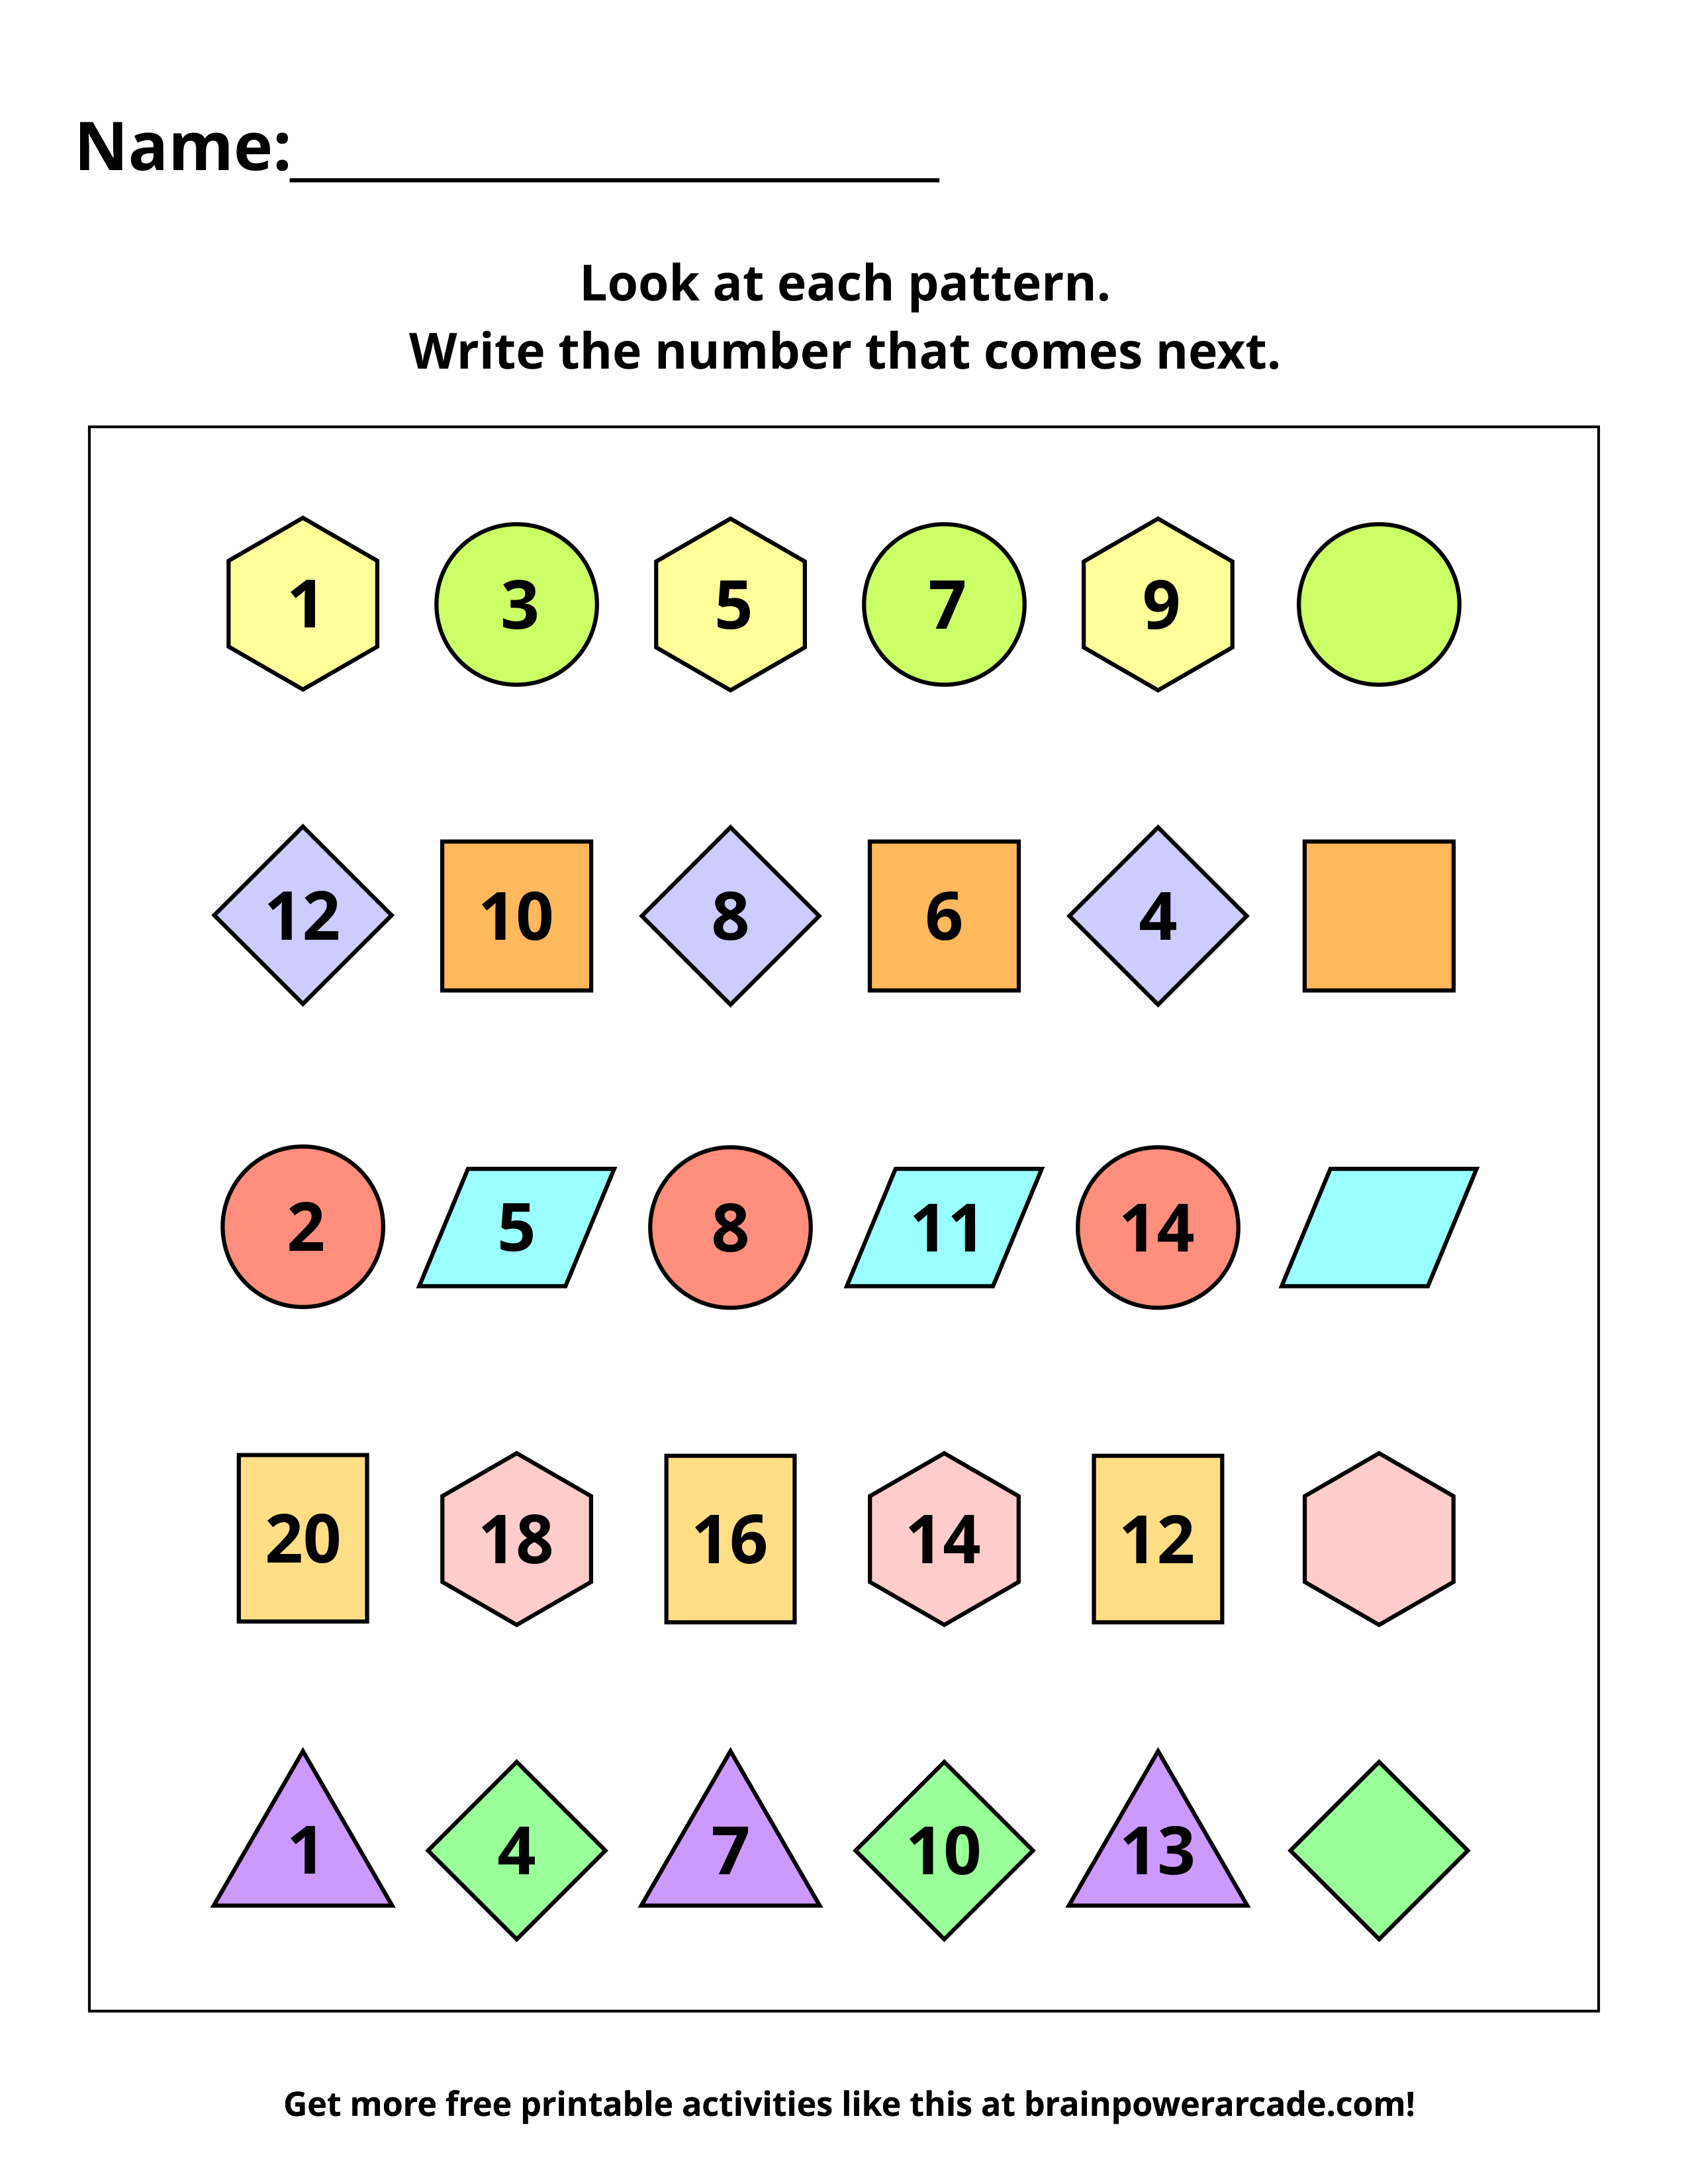 Number Sequences (Addition and Subtraction from 1-20)